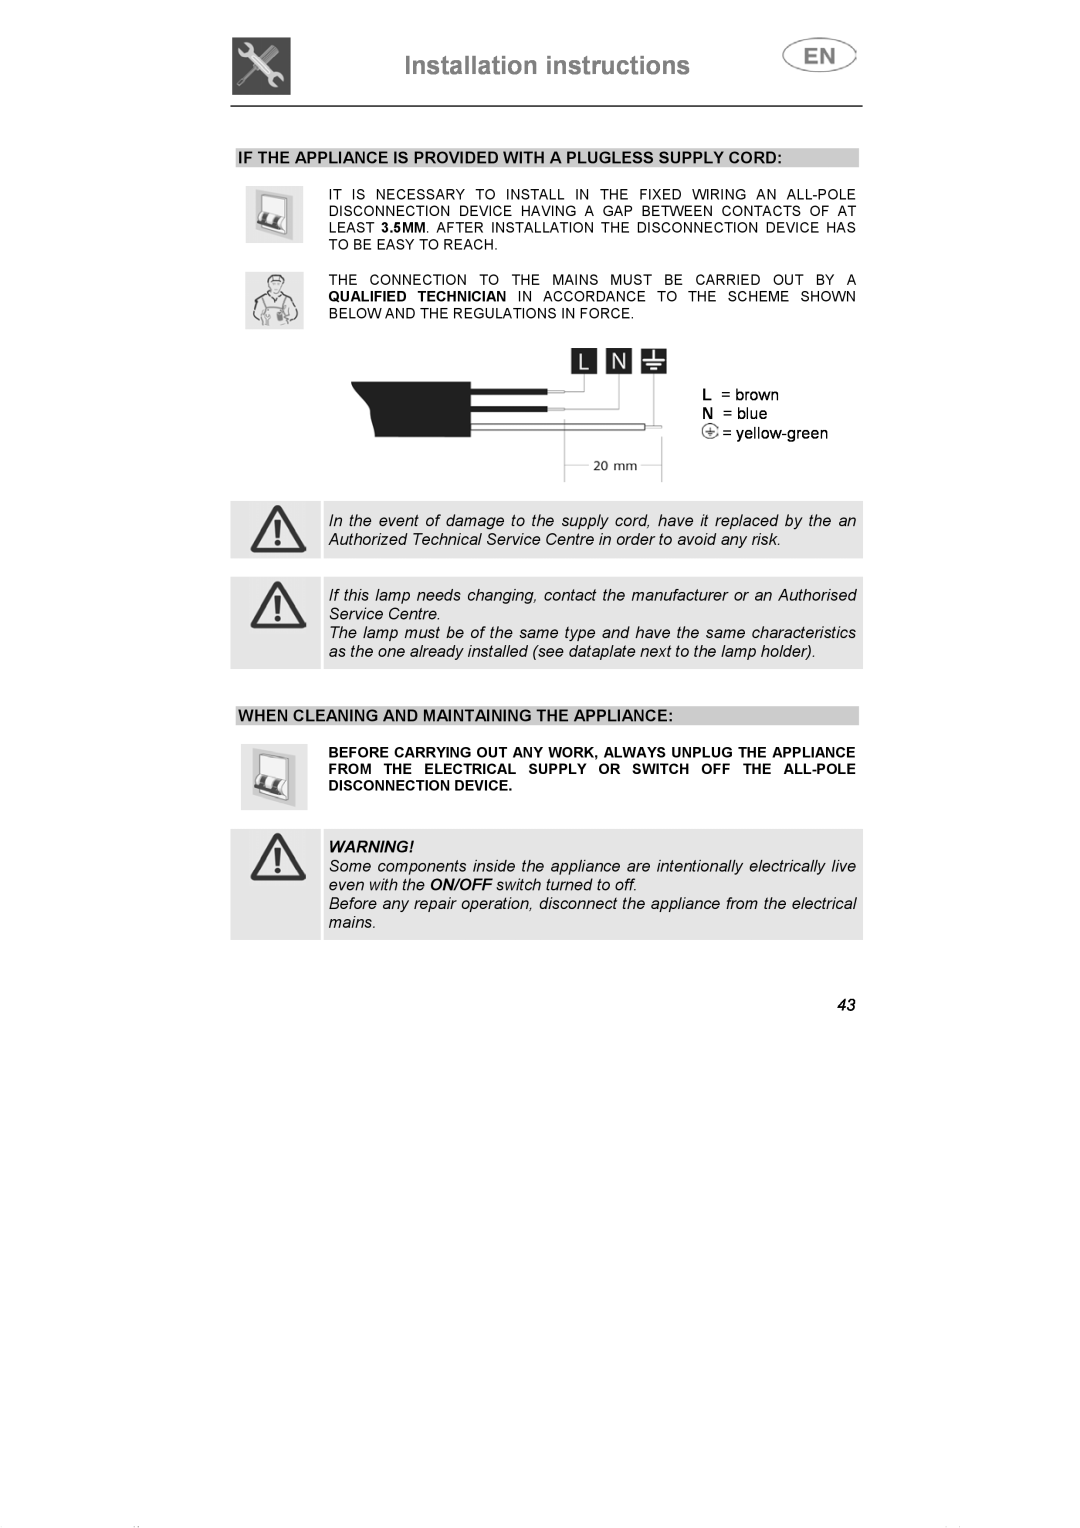 Smeg DI607 manual If The Appliance Is Provided With A Plugless Supply Cord, When Cleaning And Maintaining The Appliance 